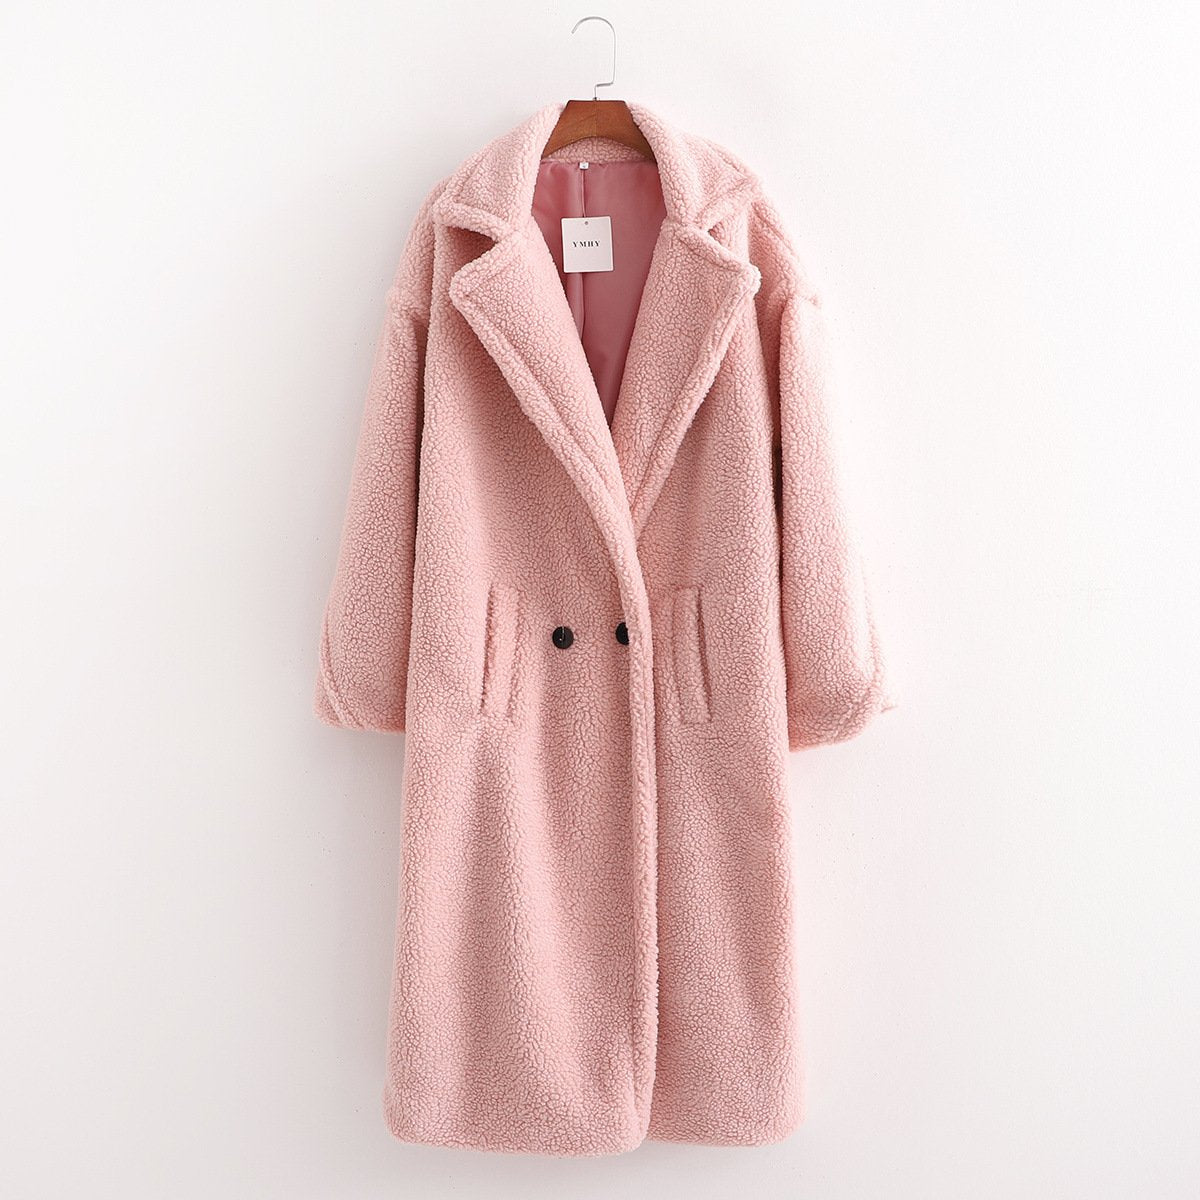 Winter Warm Fashion Long Overcoat for Women-Outerwear-Pink-S-Free Shipping at meselling99